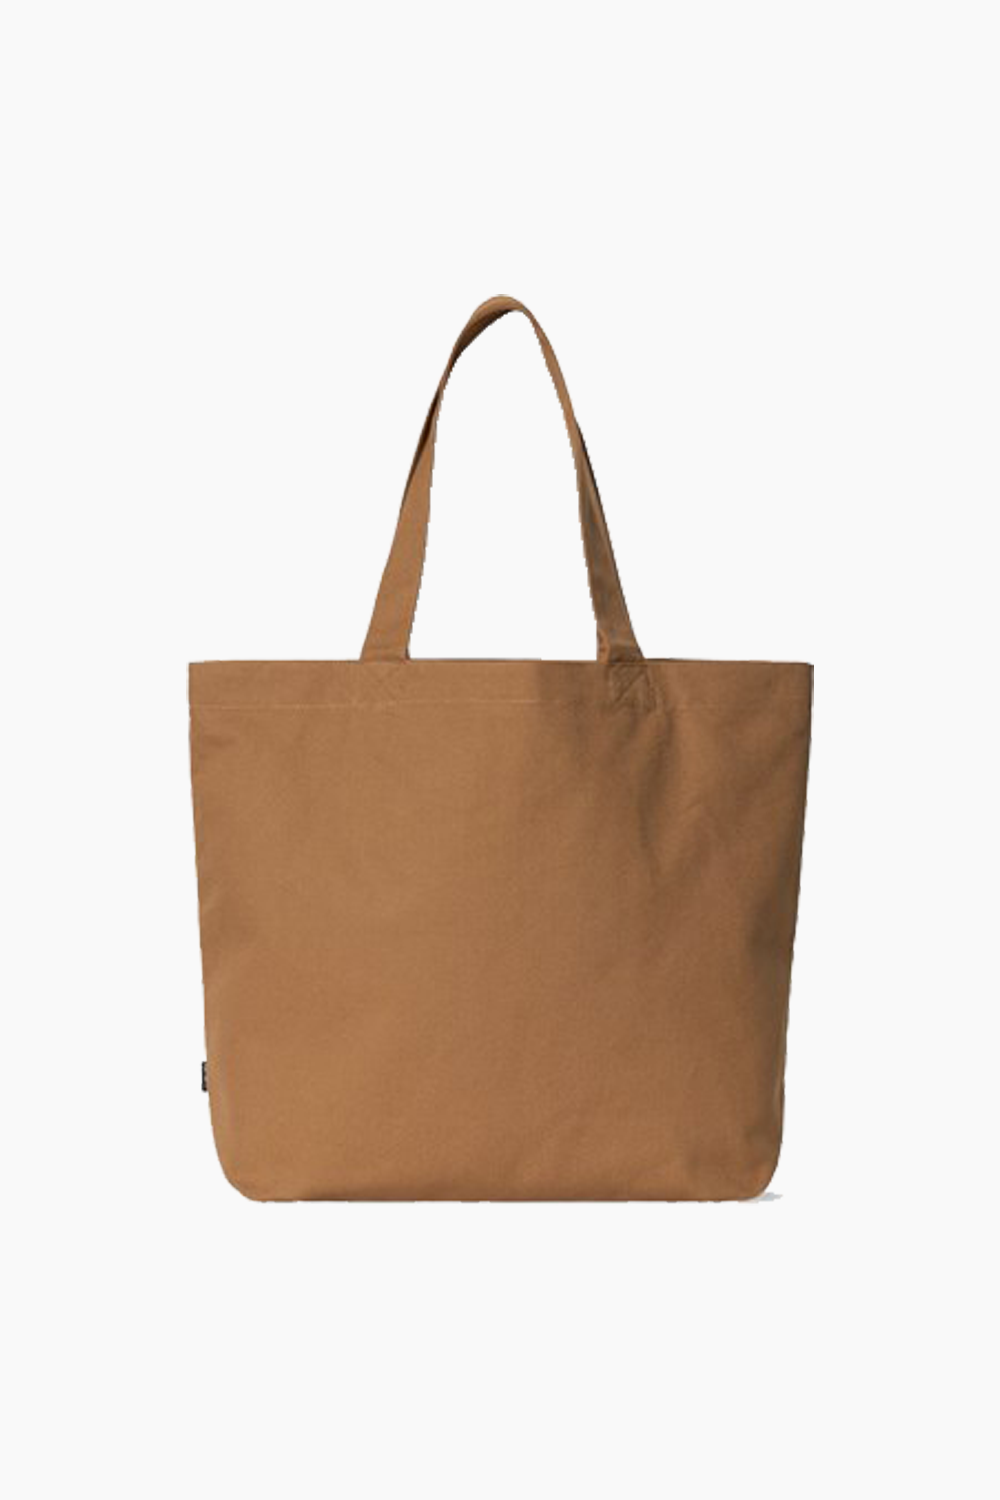 Canvas Graphic Tote Large - Spree Print, Hamilton Brown/Red - Carhartt WIP